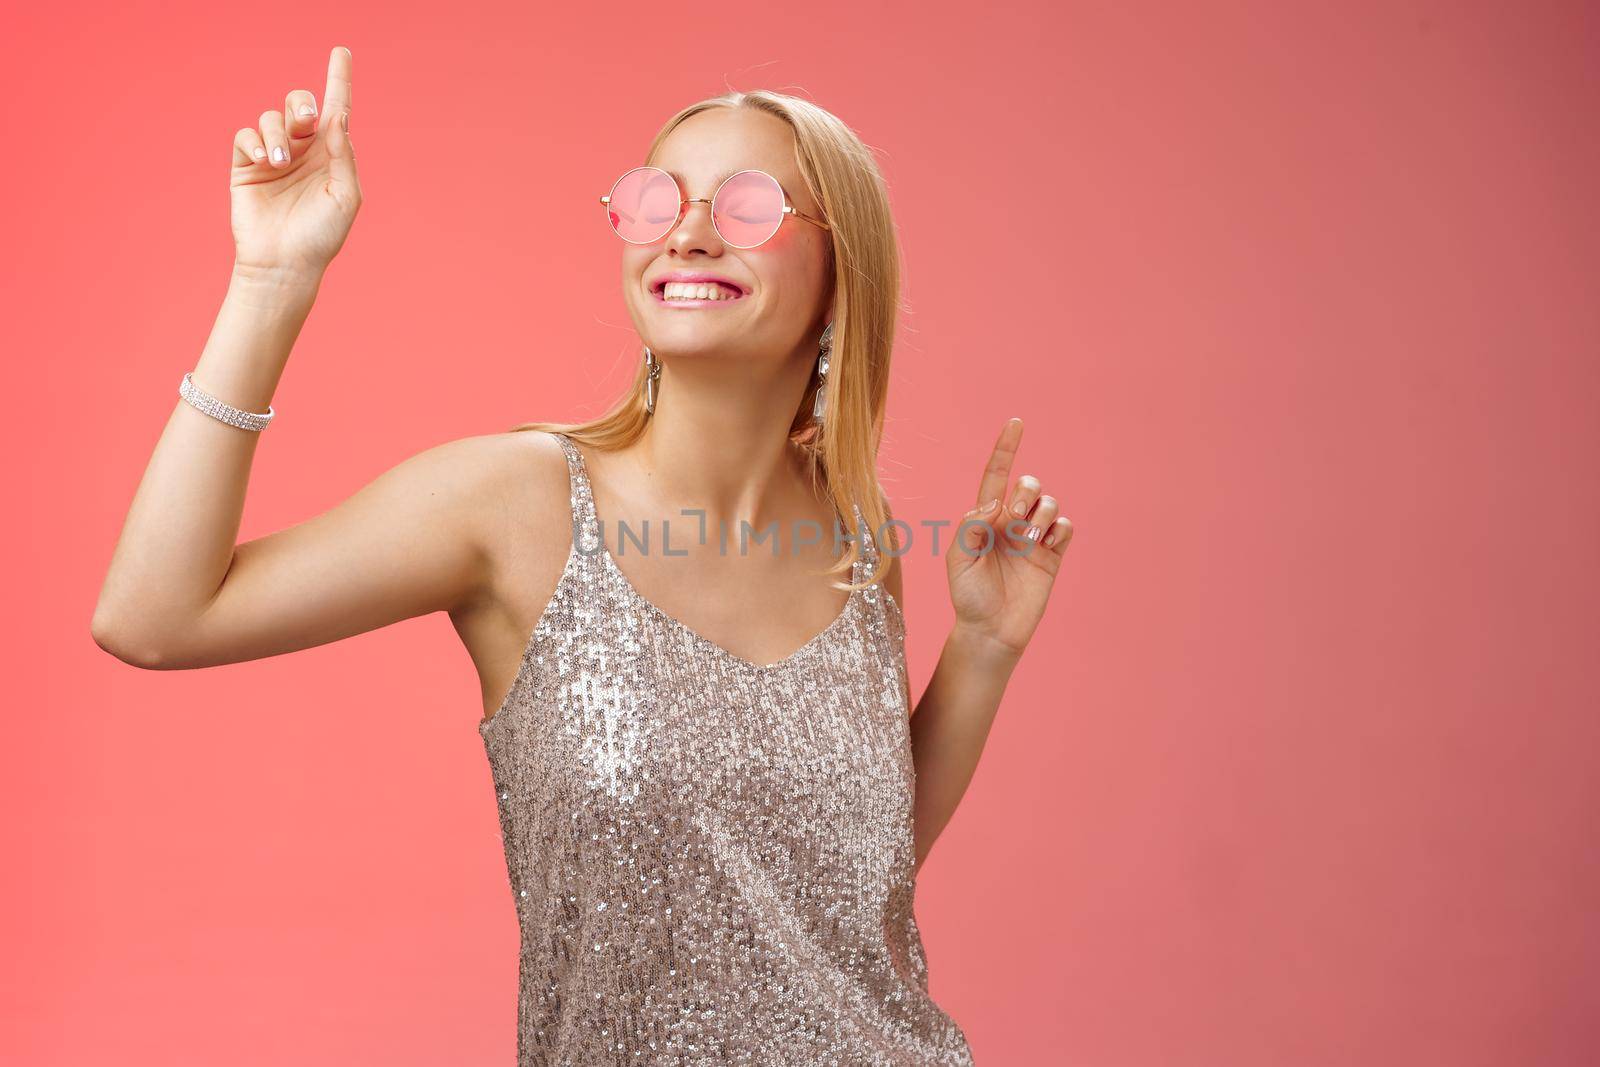 Delighted carefree attractive stylish millennial blond woman celebrating partying having fun wear sunglasses trendy silver dress dancing closed eyes broad smile waving hands up, red background.